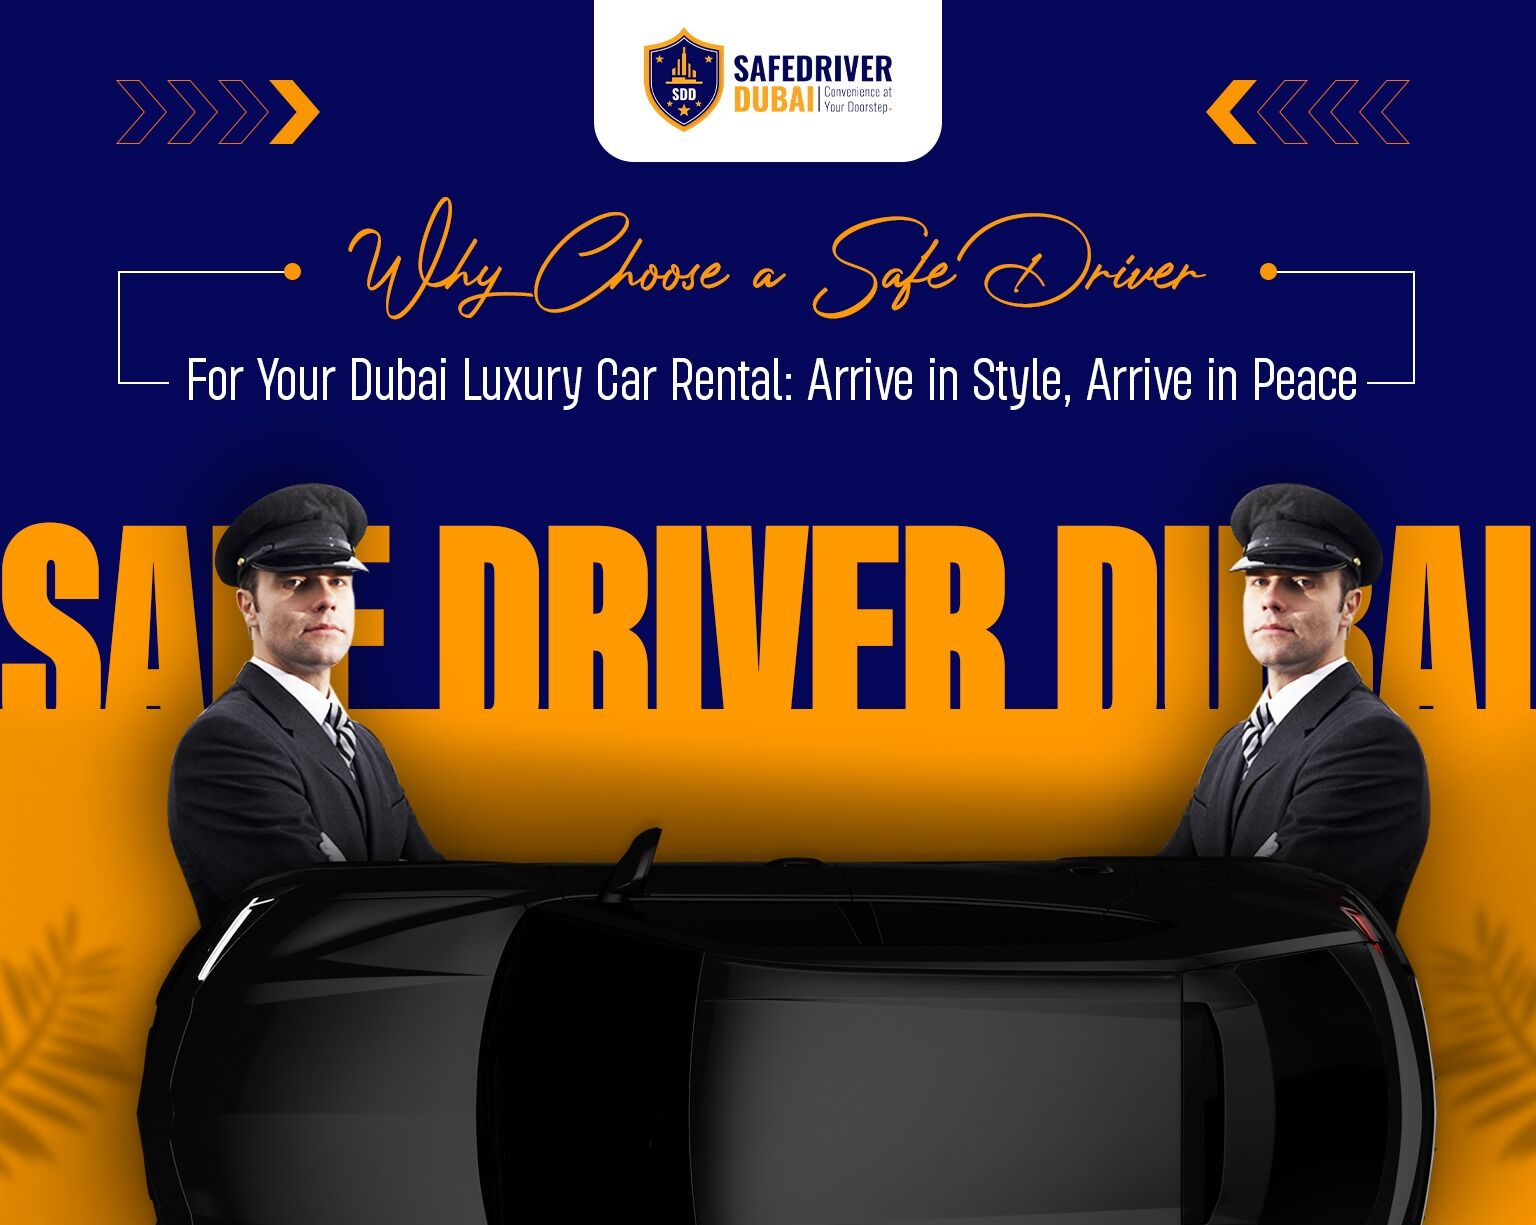 Why-Choose-a-Safe- Driver-for-Your-Dubai-Luxury-Car-Rental-Arrive-in-Style-Arrive- in-Peace